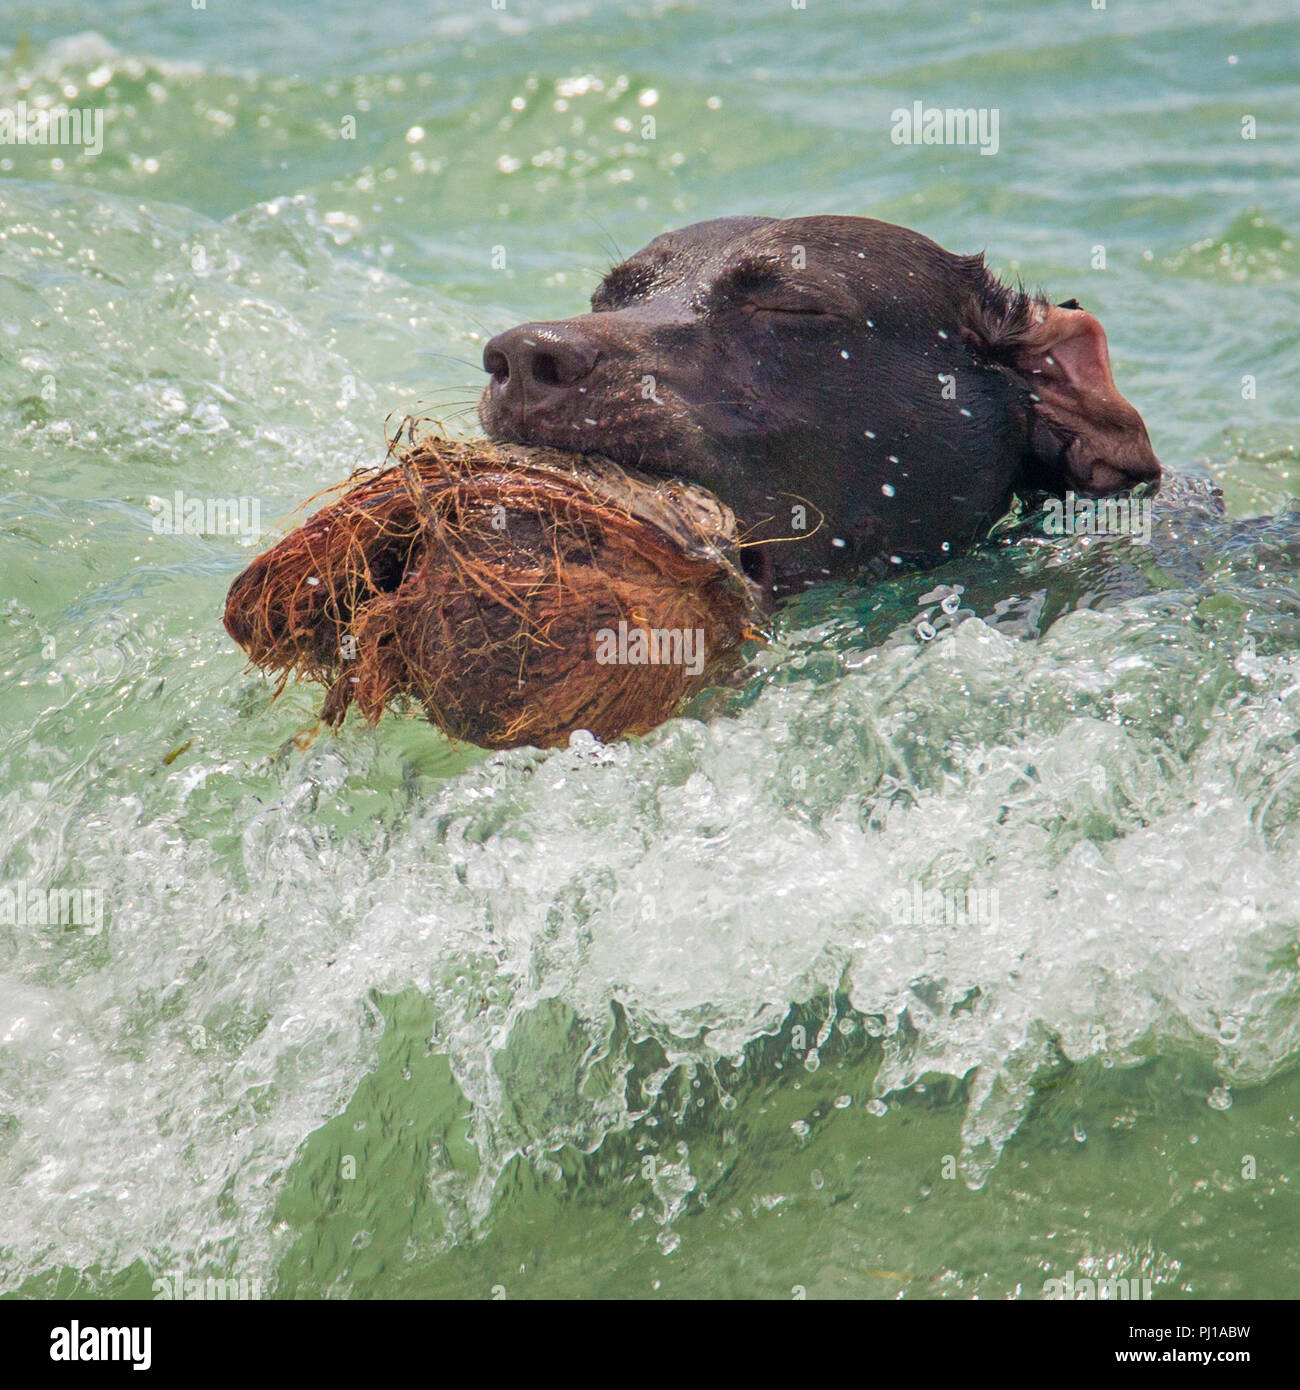 Dog swimming in ocean with a coconut, United States Stock Photo